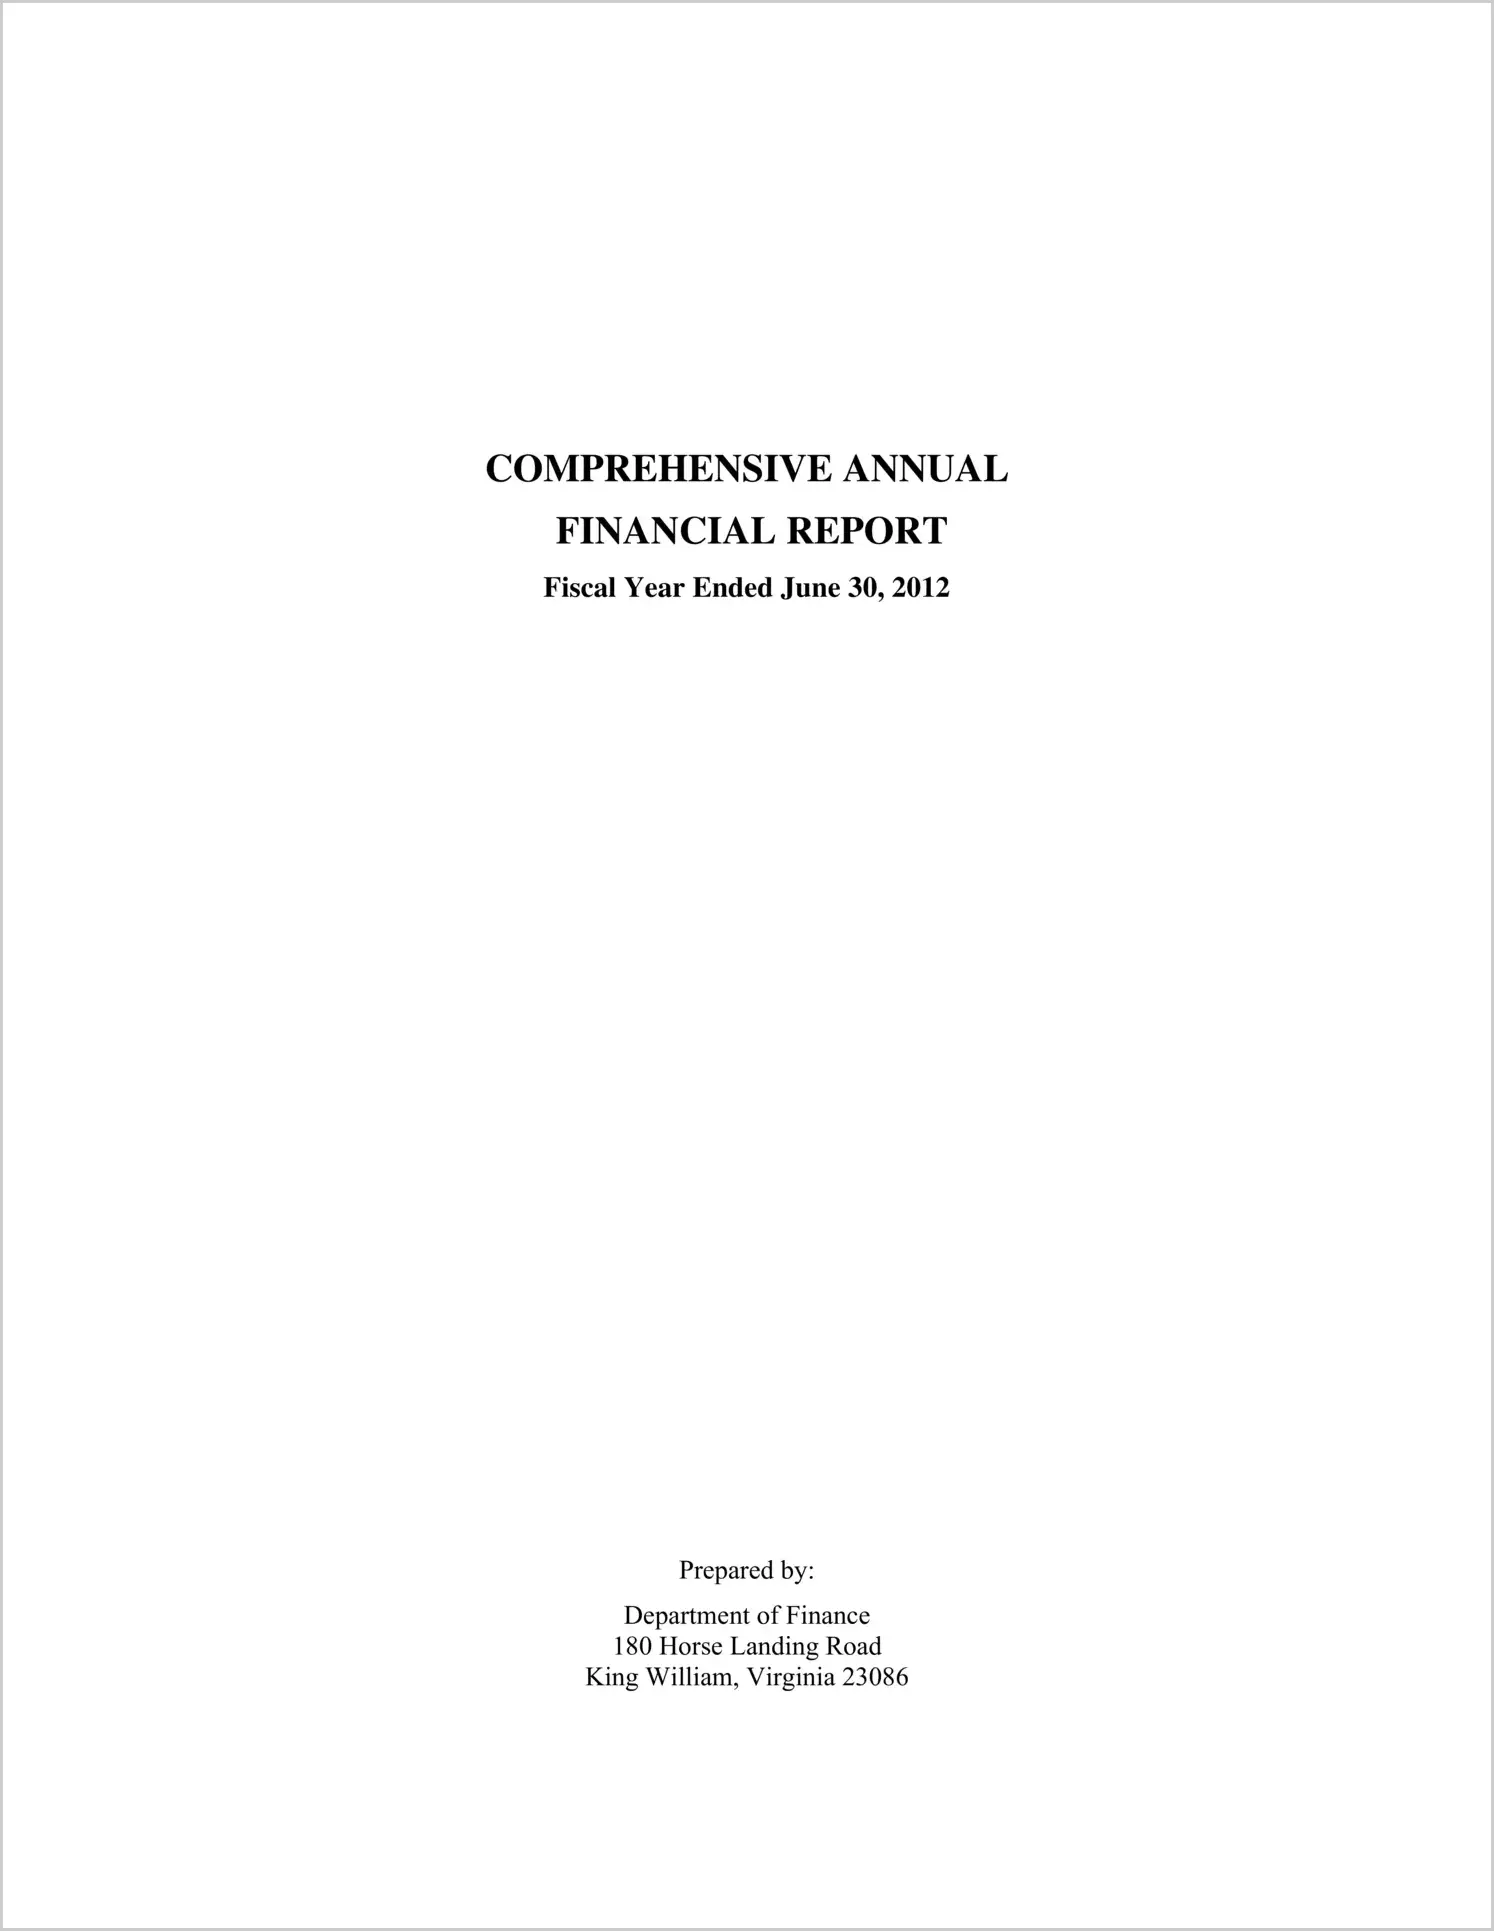 2012 Annual Financial Report for County of King William